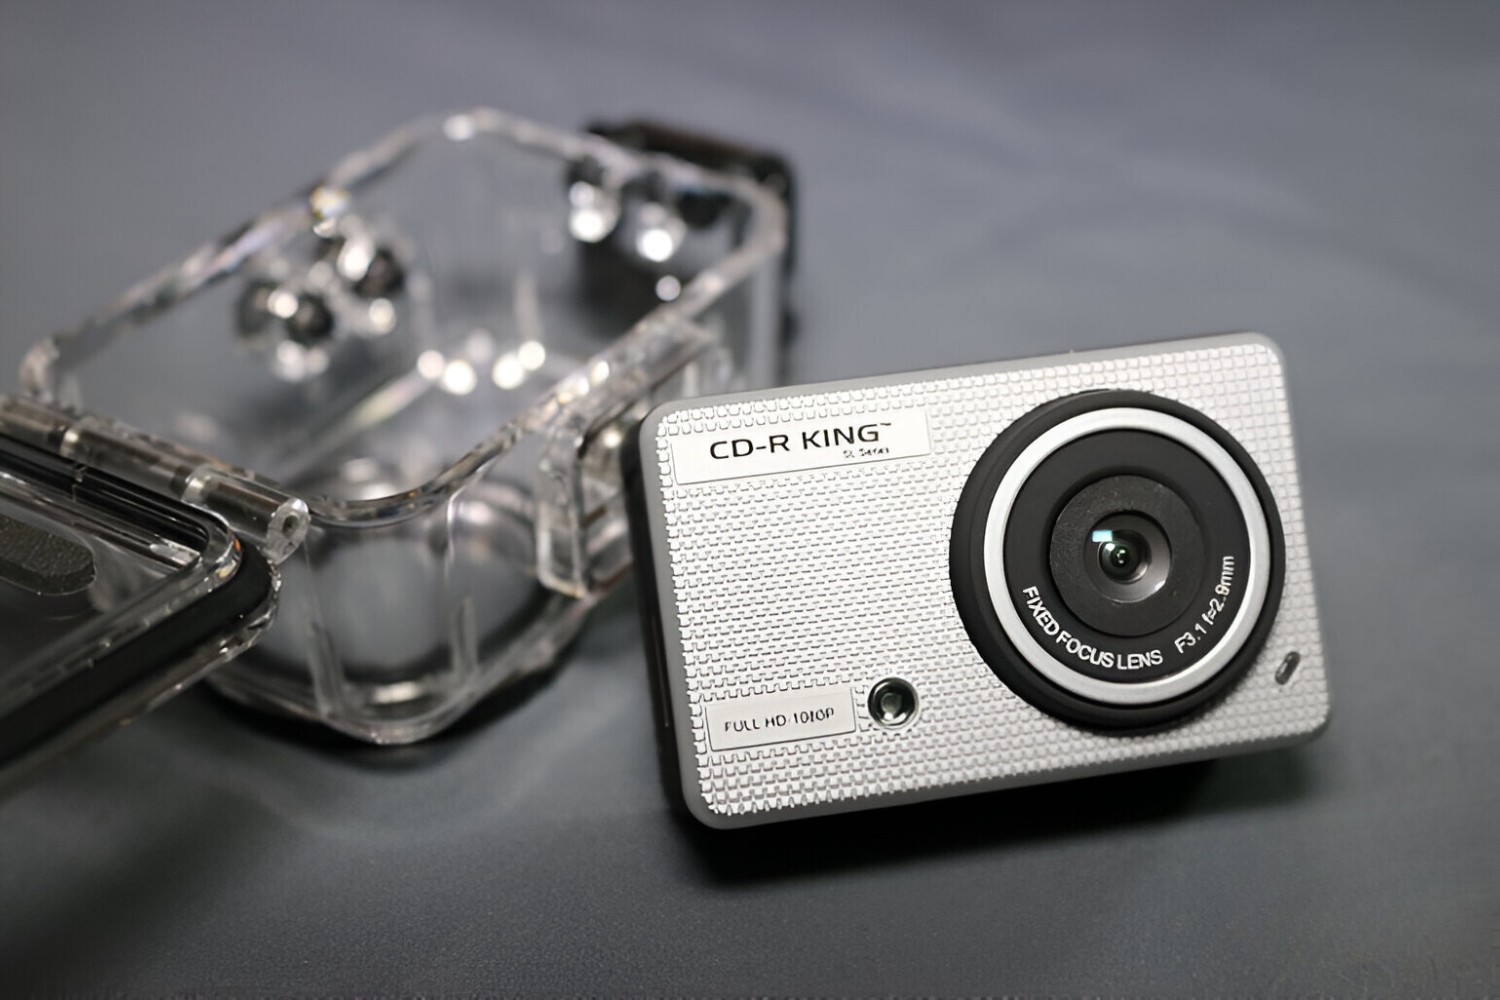 what-apps-can-i-use-for-cd-r-king-action-camera